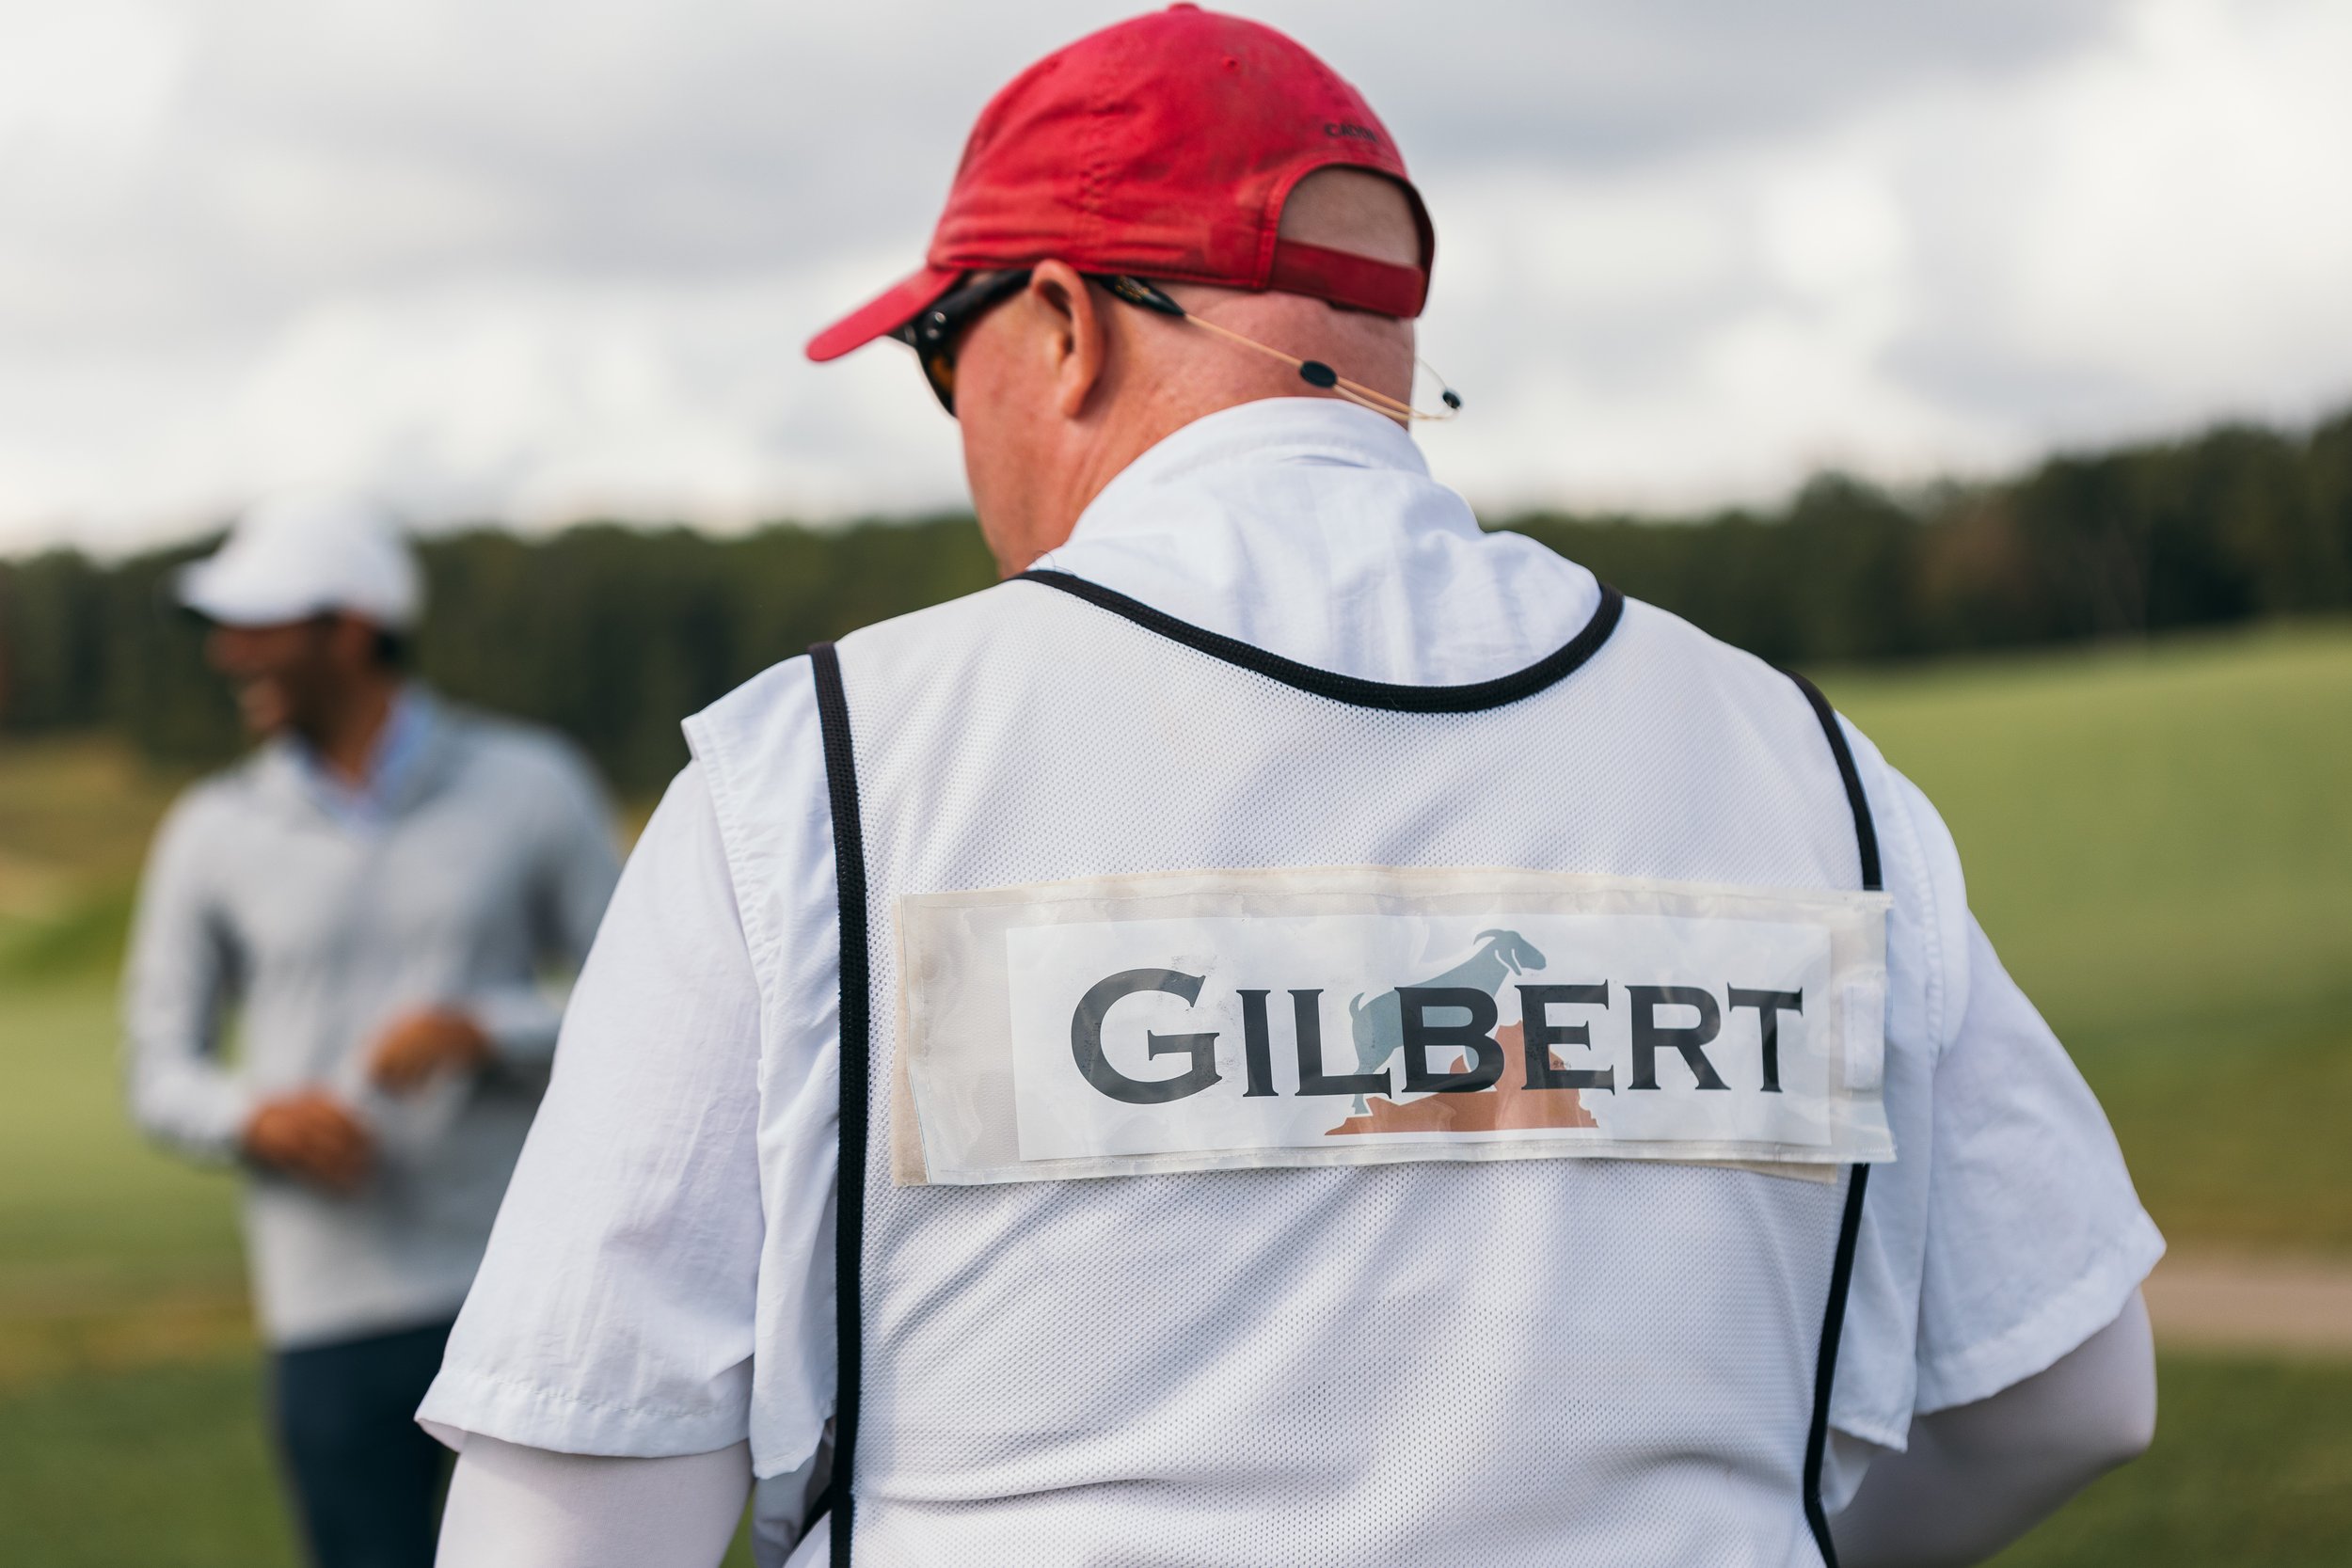  A caddie caddying for country-music singer, Brantley Gilbert with “Gilbert” written on his shirt.